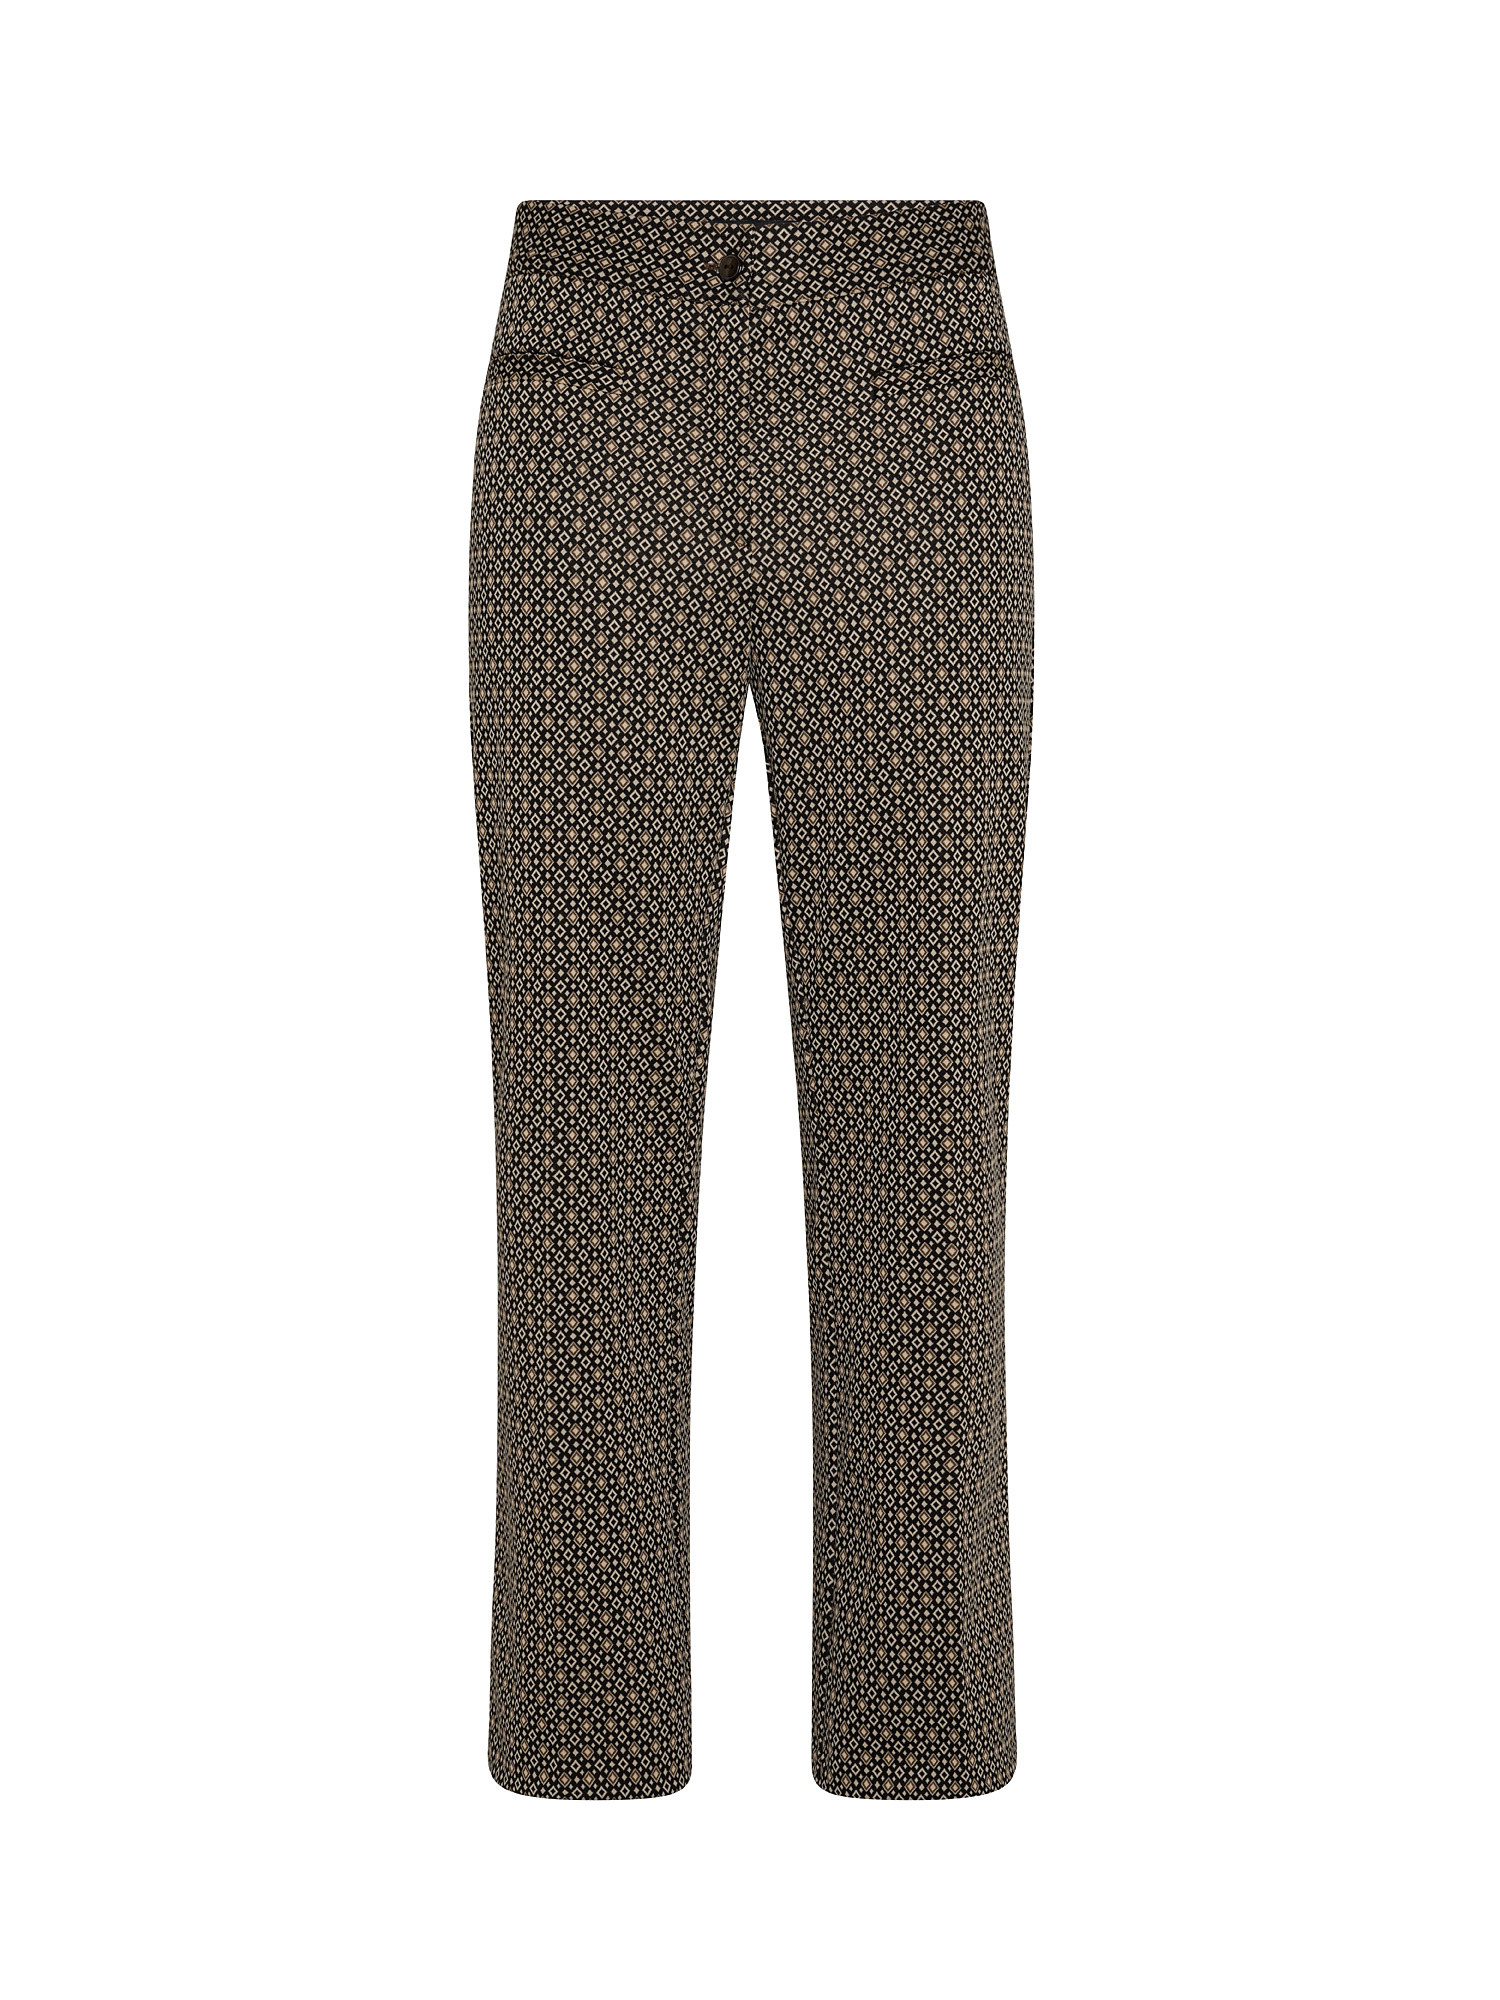 Trousers with pattern, Grey, large image number 0